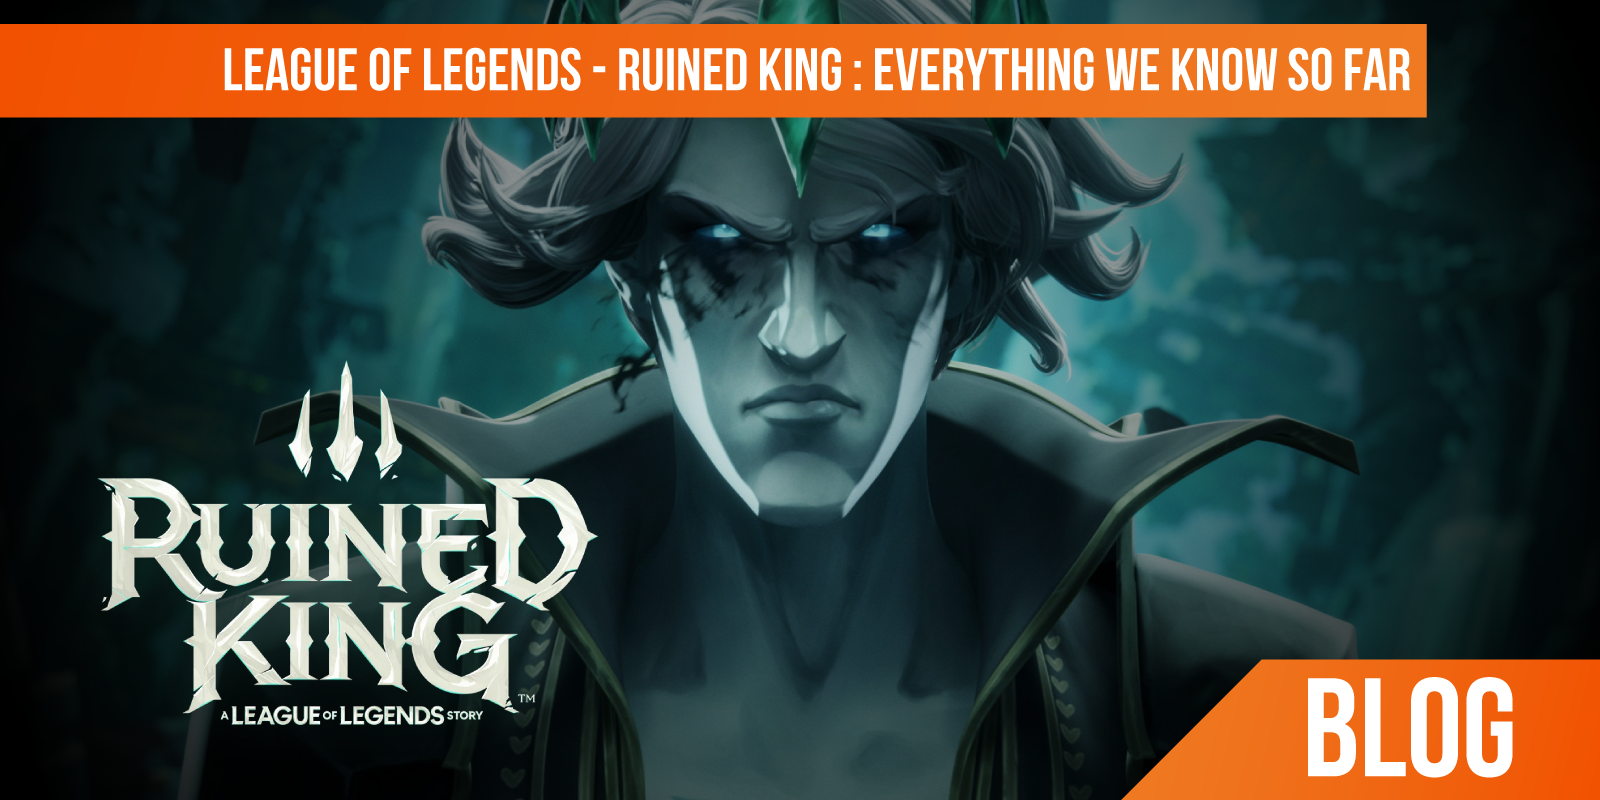 League of Legends: Ruined King (what we know so far) - Fierce PC